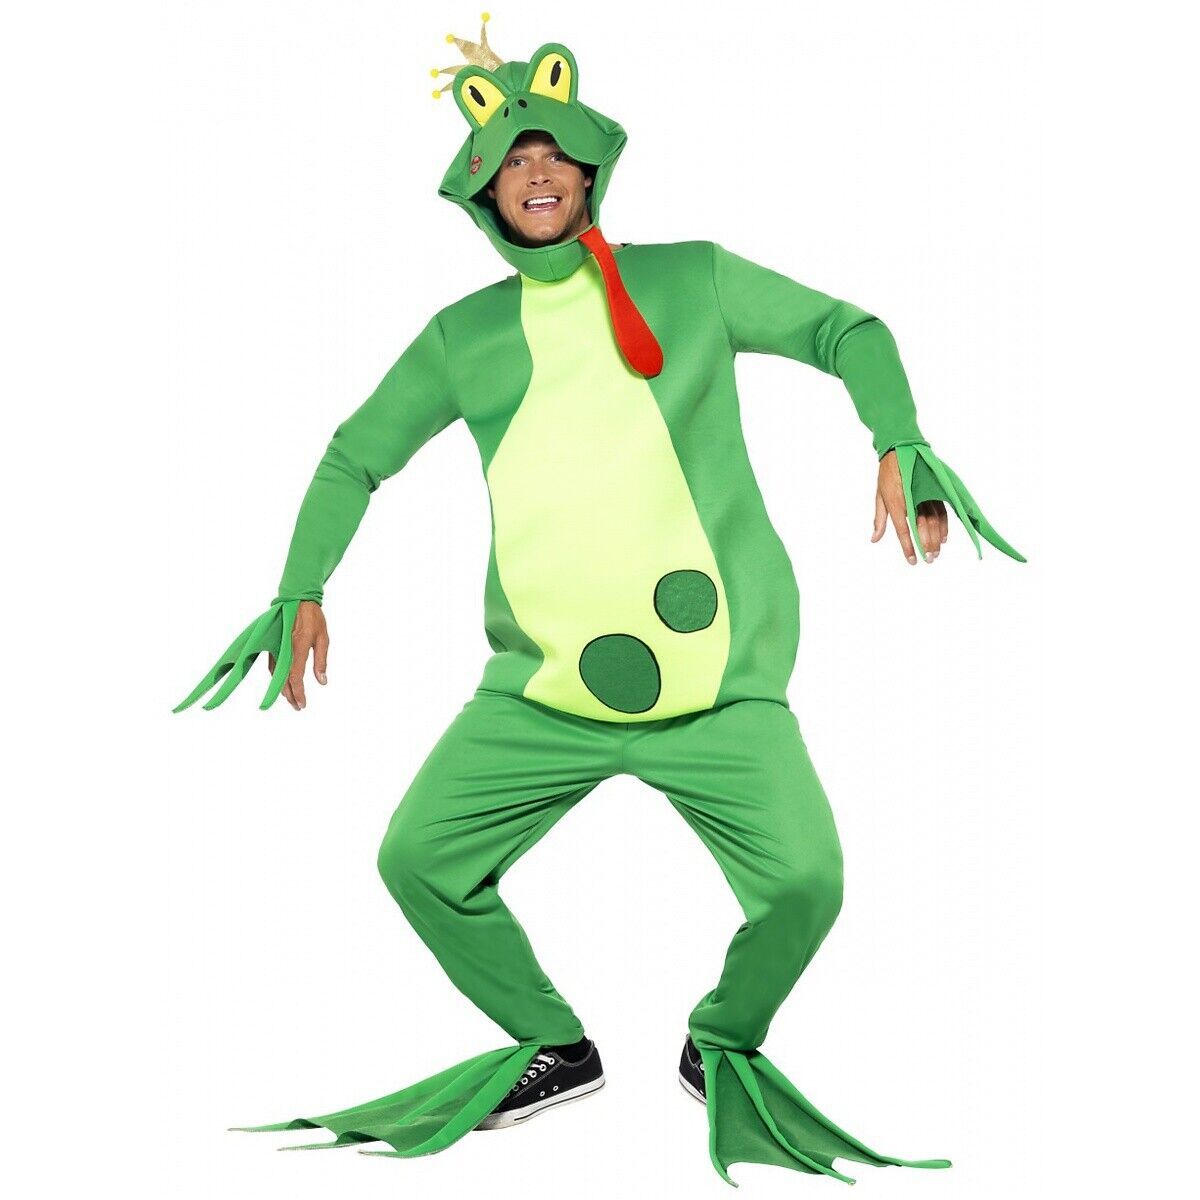 Ebd Products - Frog prince costume adult funny halloween fancy dress